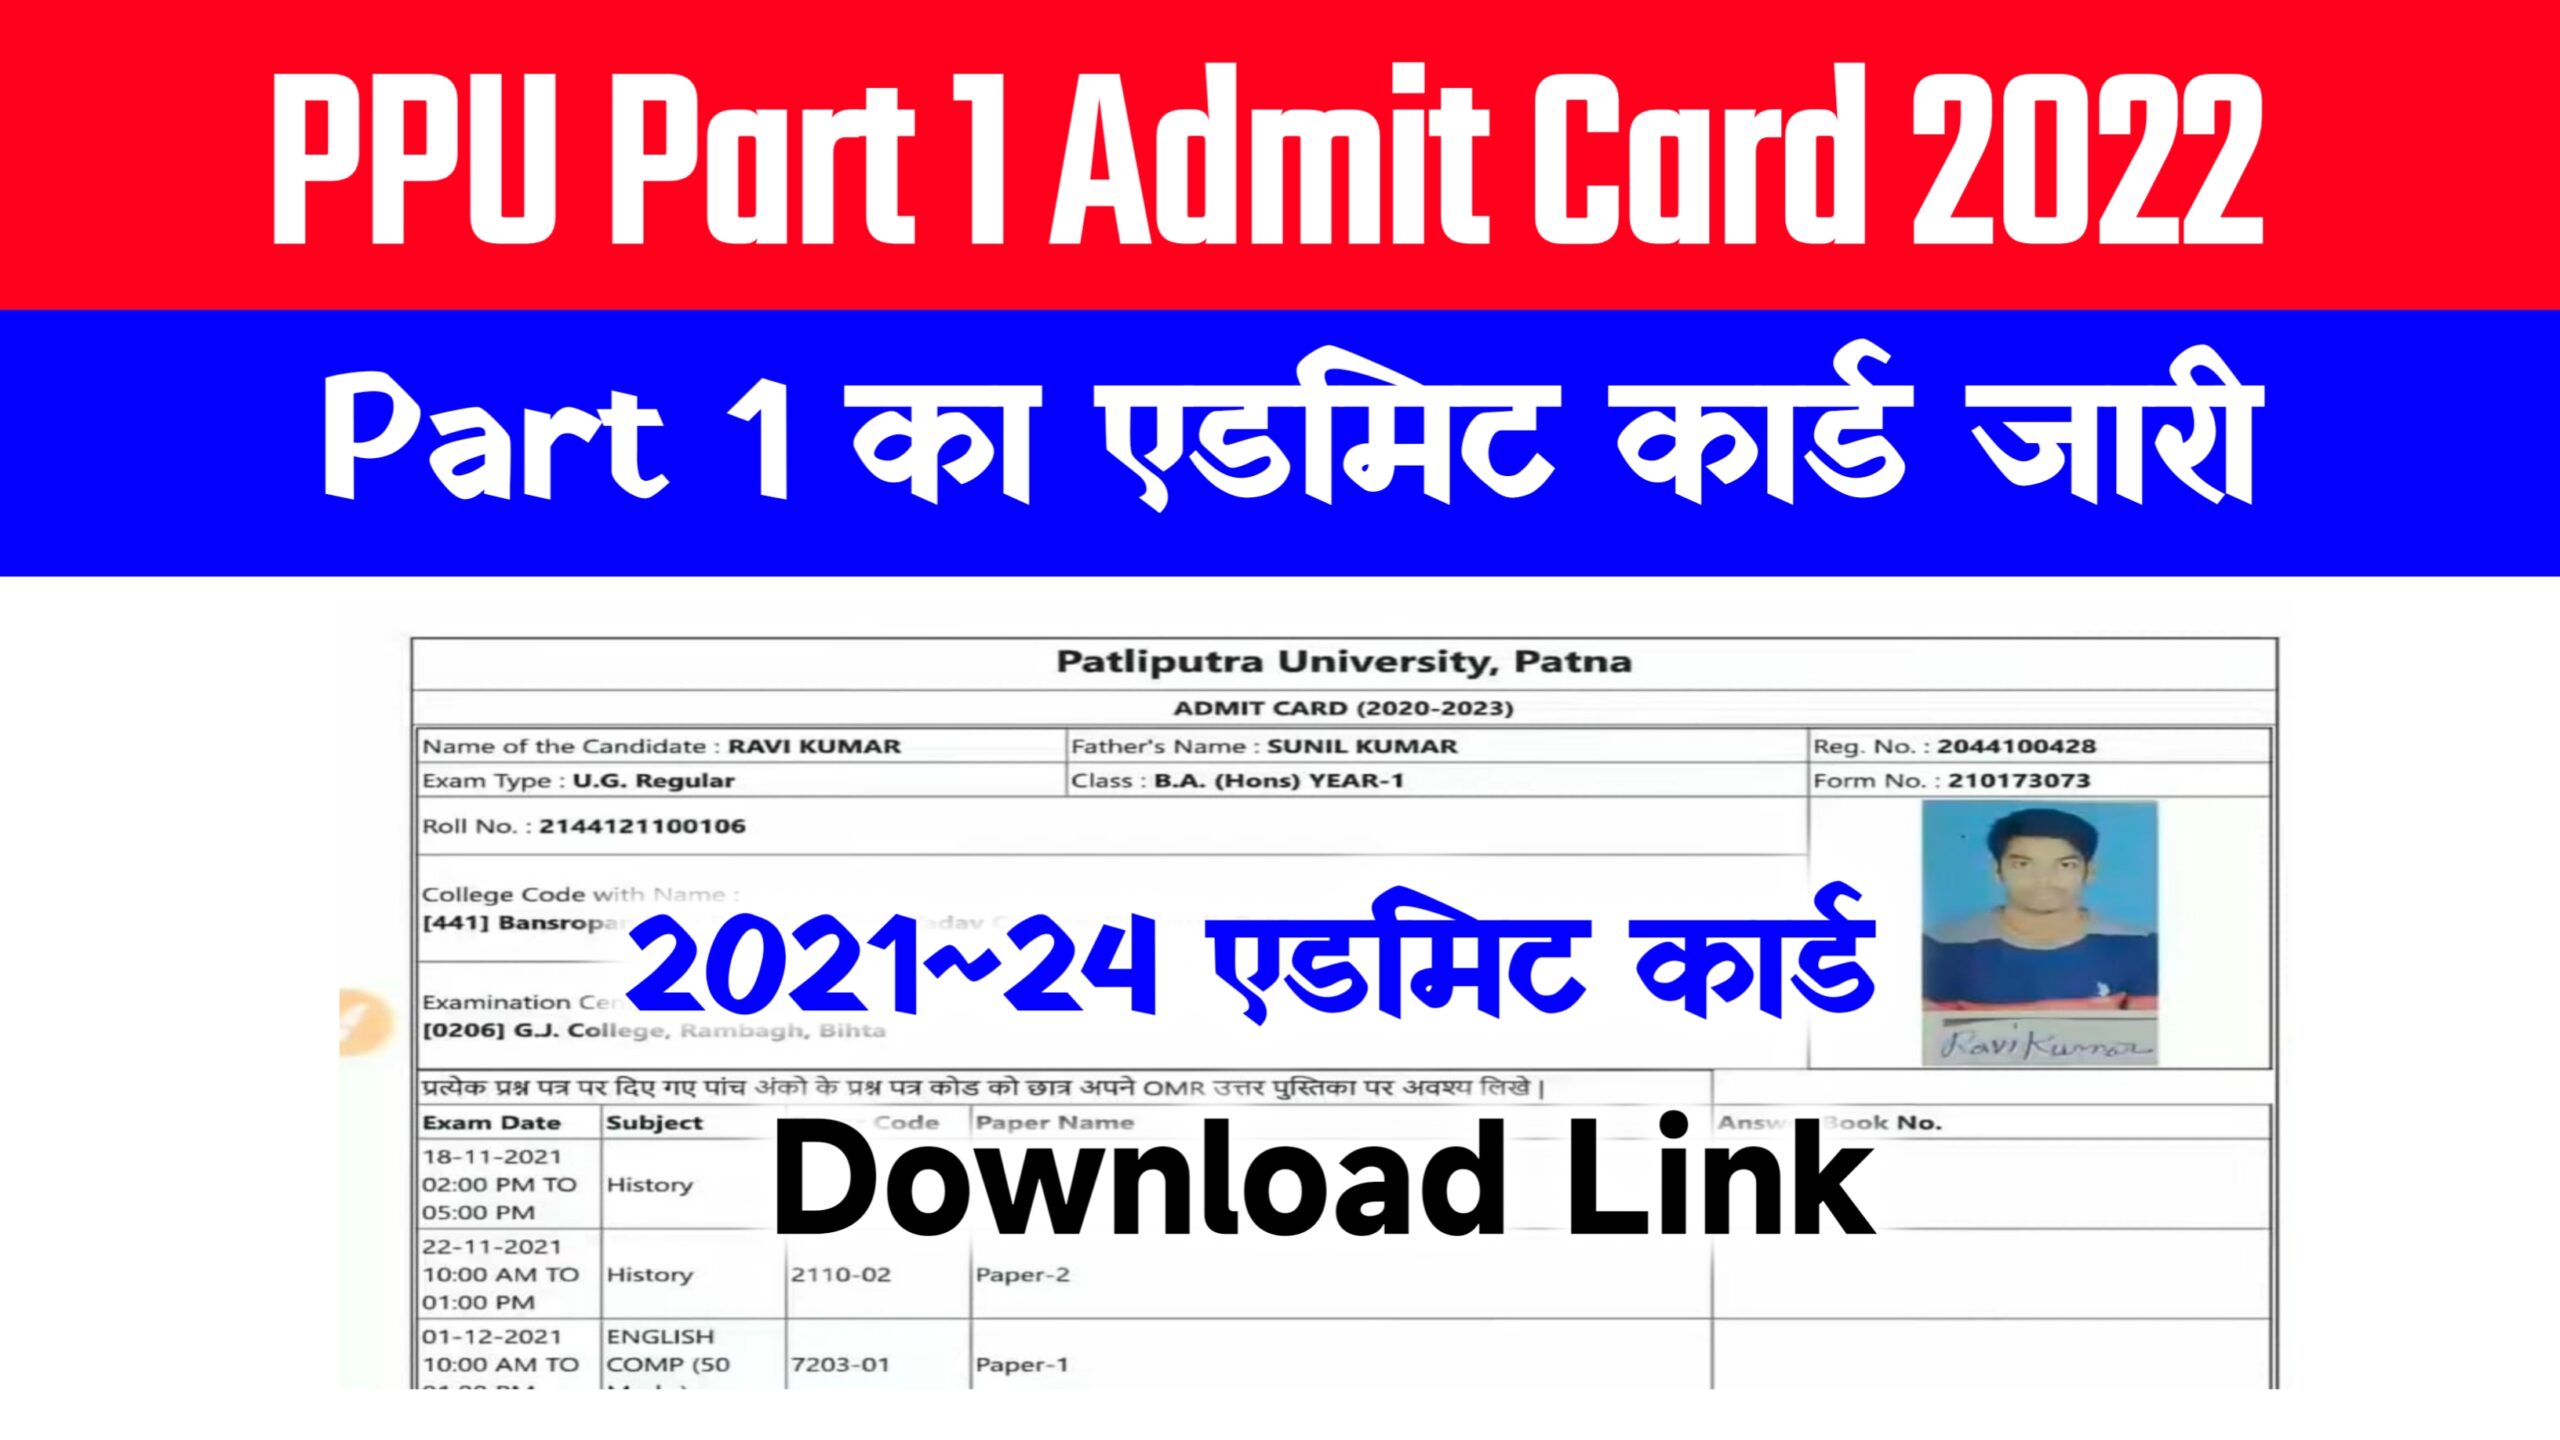 PPU Part 1 Admit Card 2022 Download ~ Patliputra University @ppup.ac.in